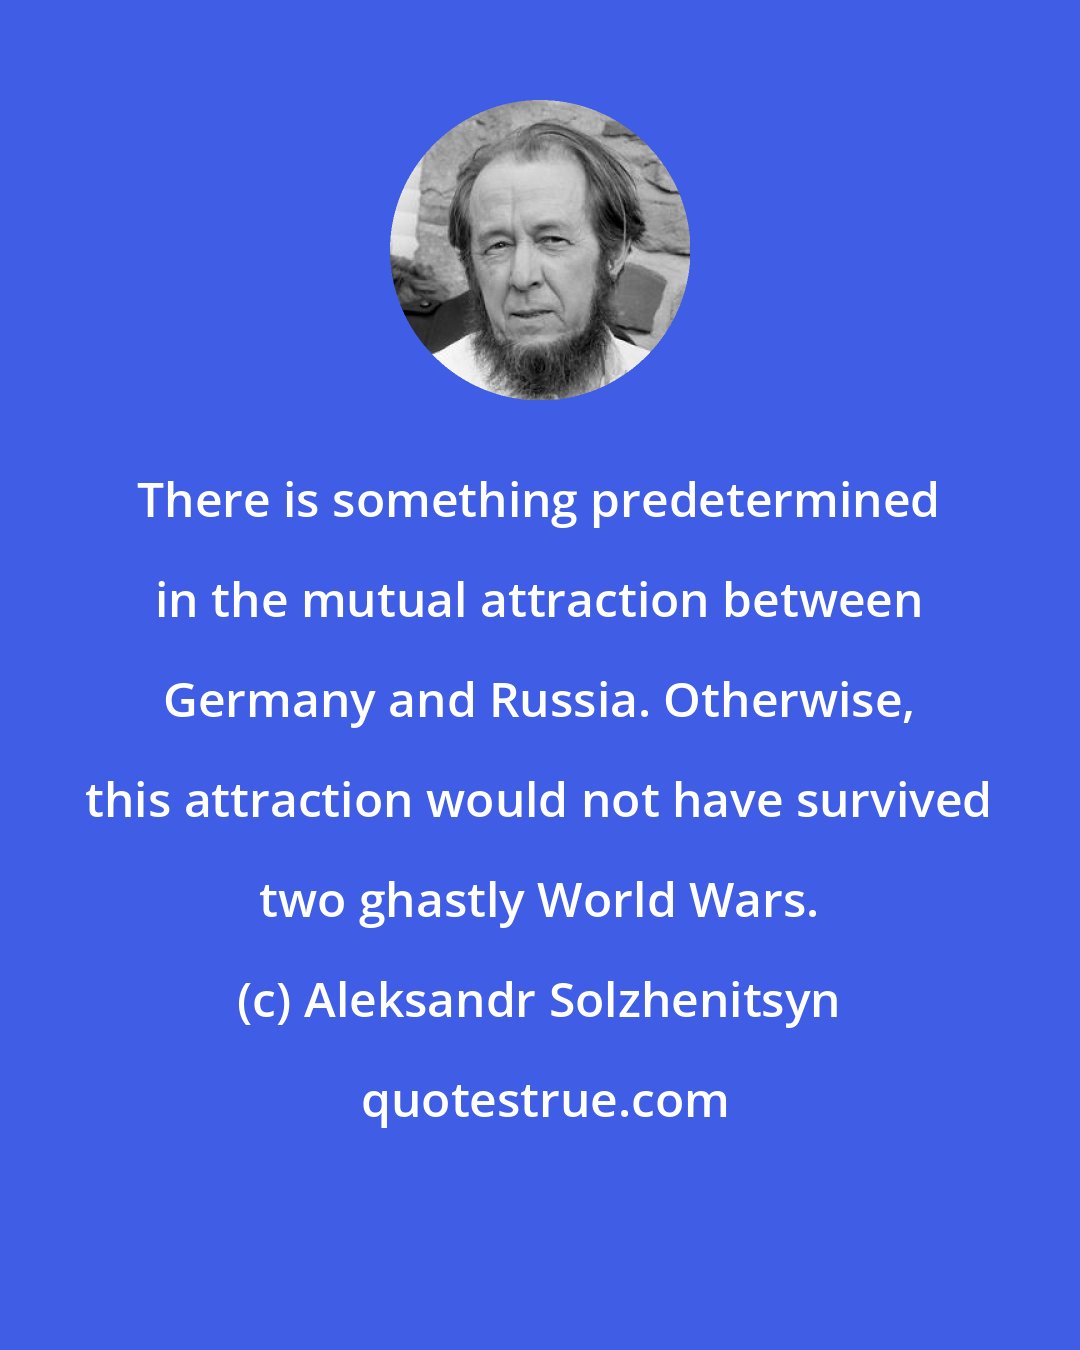 Aleksandr Solzhenitsyn: There is something predetermined in the mutual attraction between Germany and Russia. Otherwise, this attraction would not have survived two ghastly World Wars.